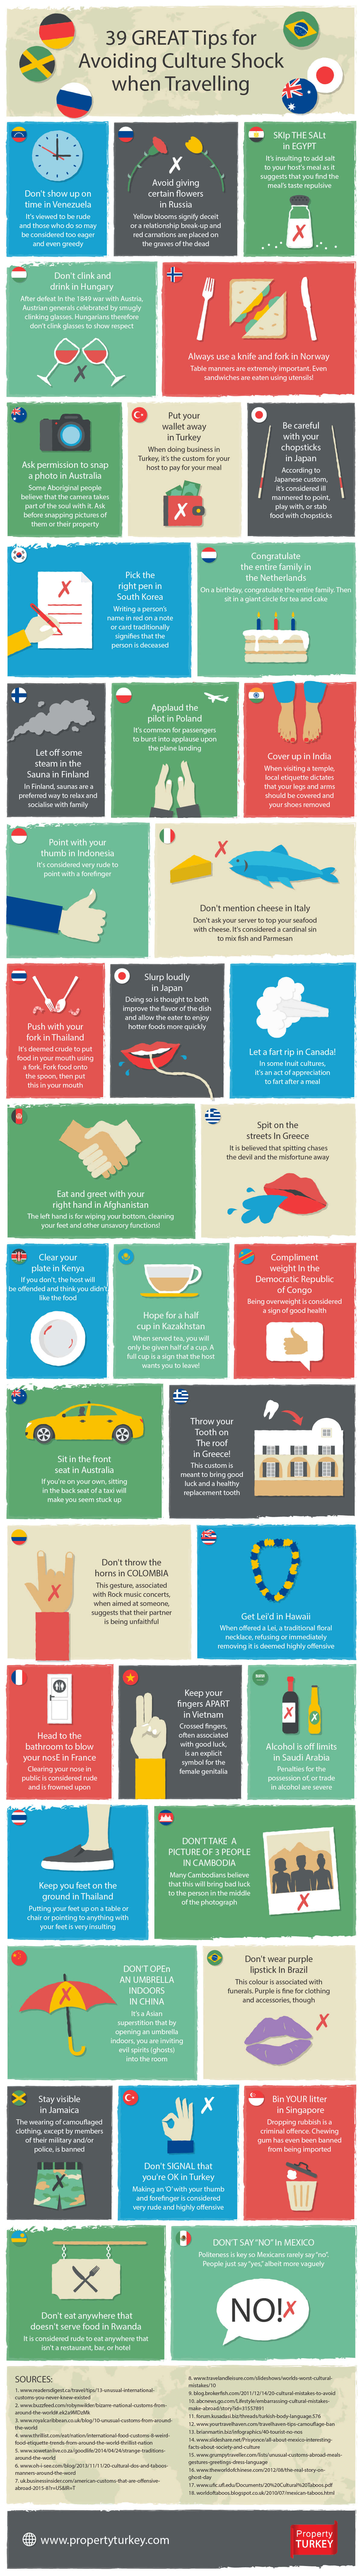 39 Great tips for avoiding culture shock when travelling infographic